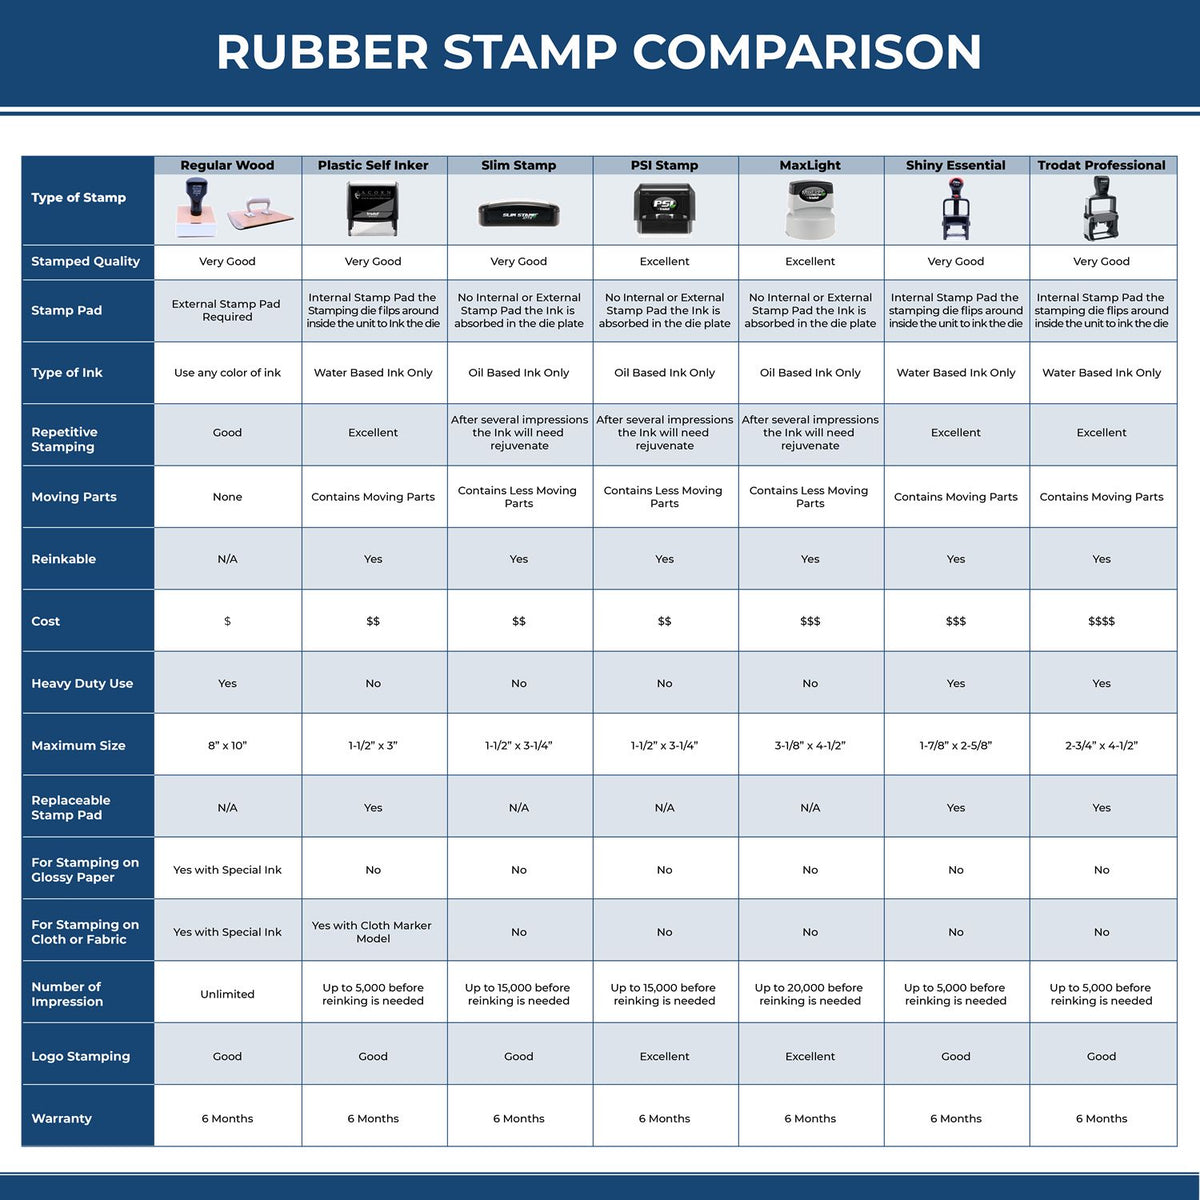 Large Self Inking Storage Stamp 4627S Rubber Stamp Comparison